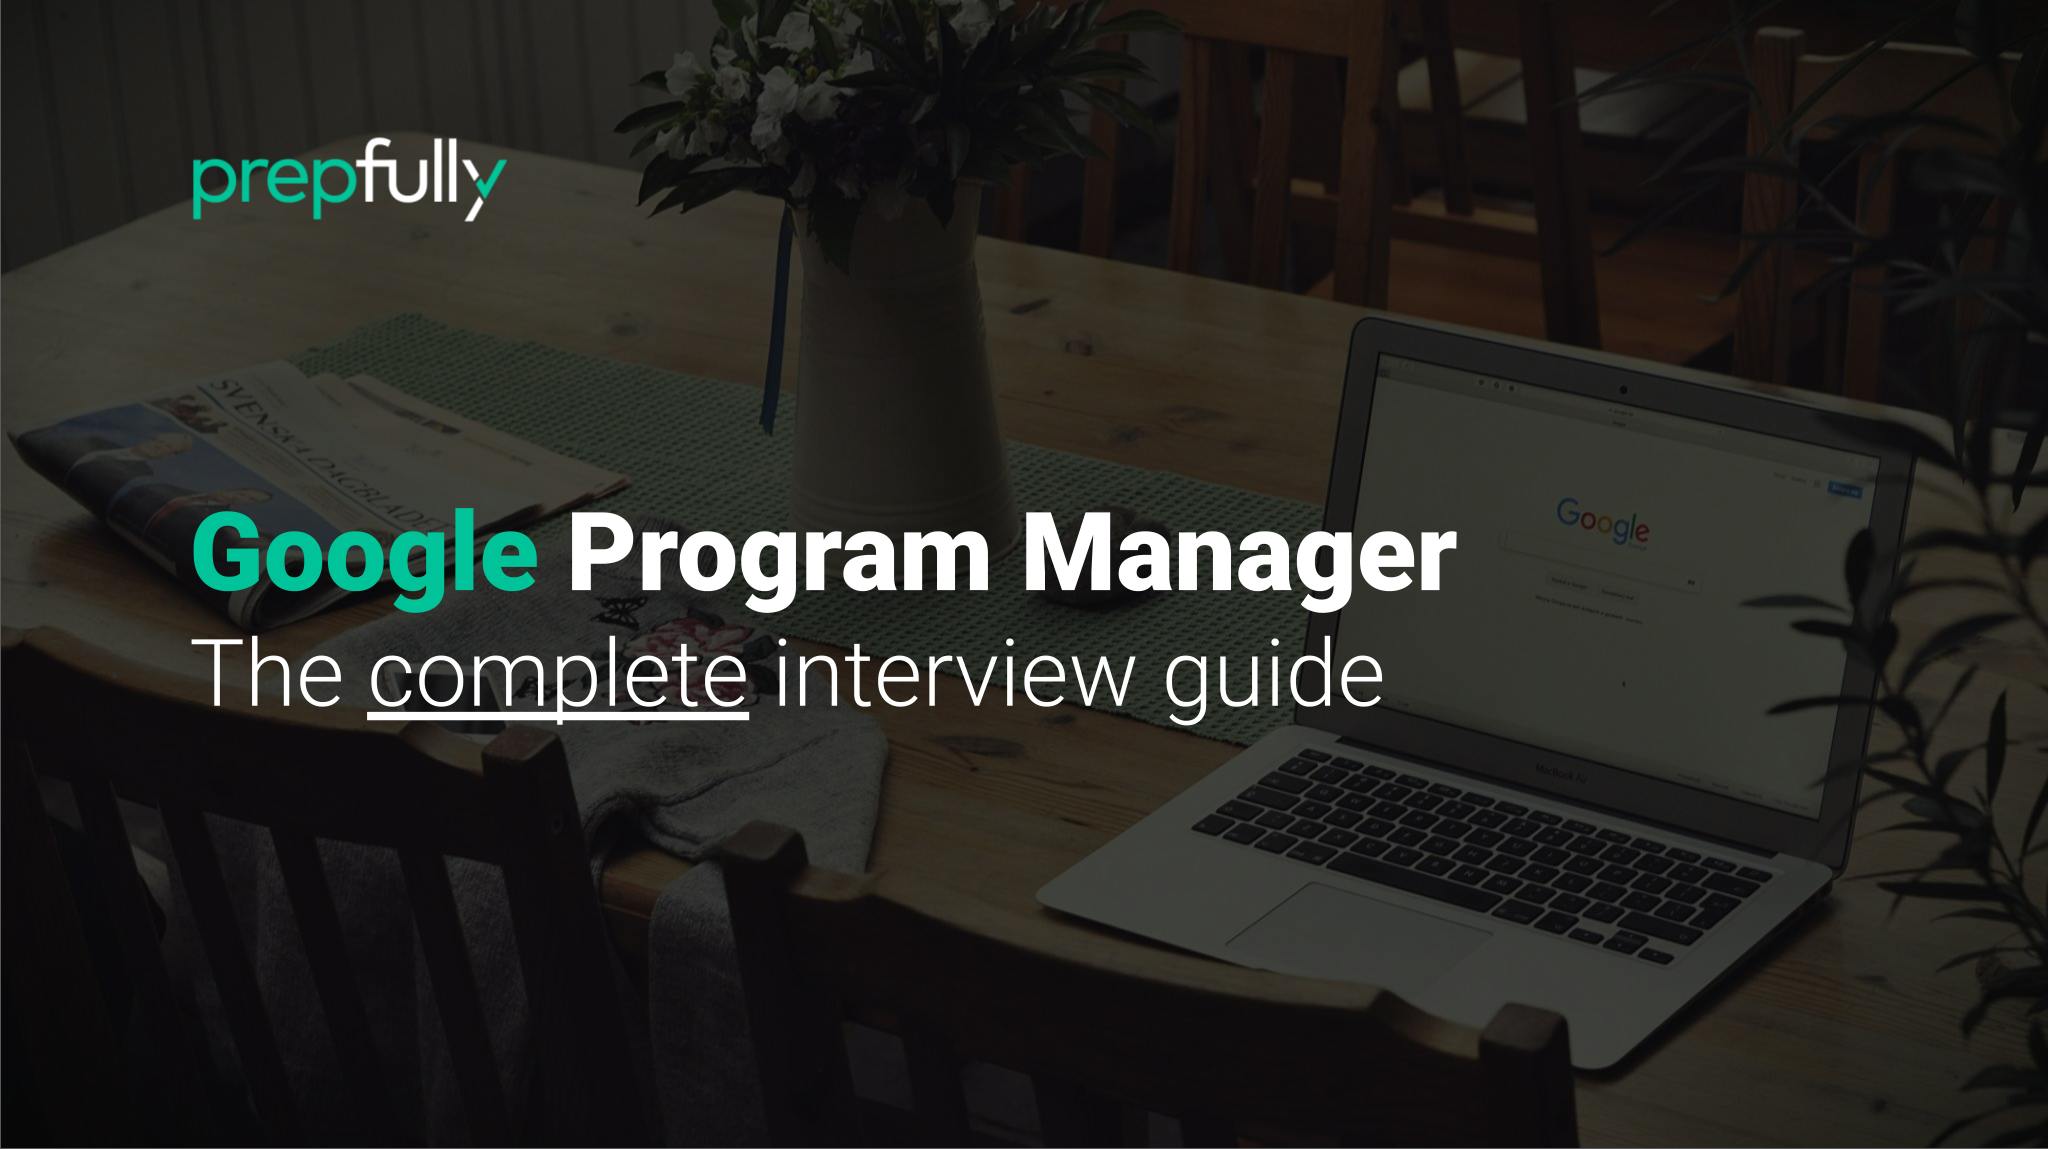 Interview guide for Google Program Manager